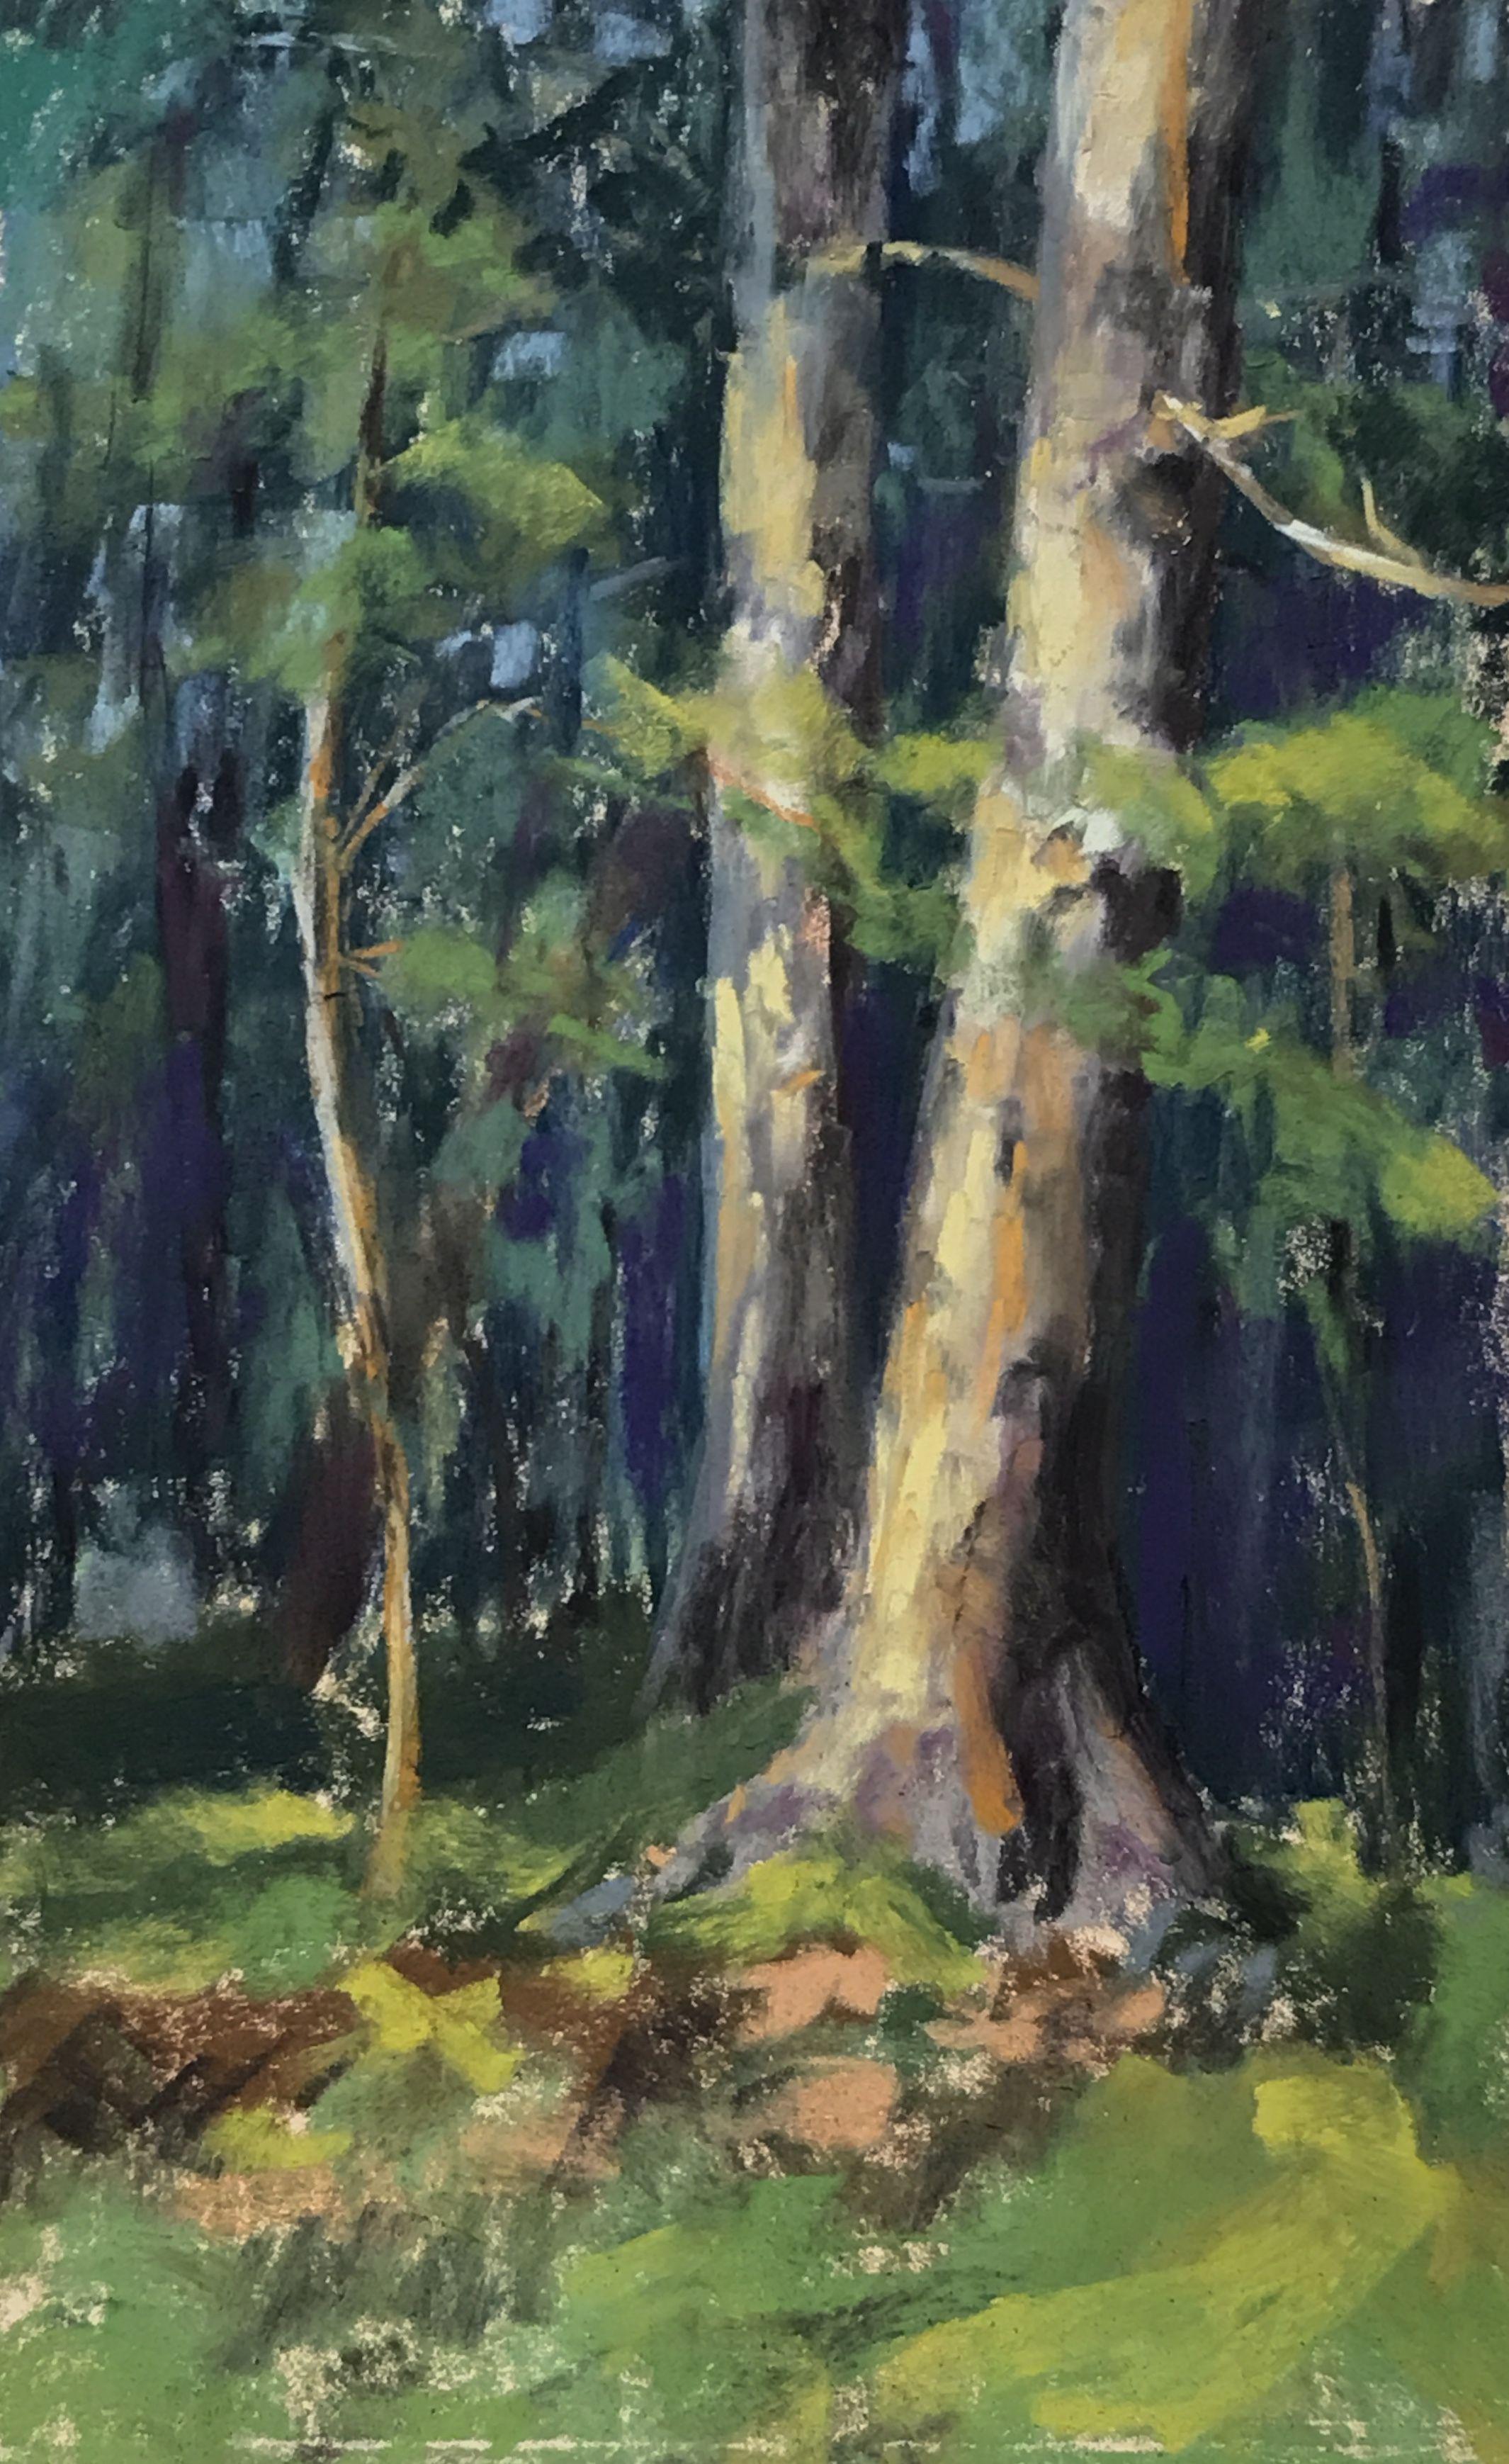 Oaks on the Drive, Painting, Pastels on Pastel Sandpaper